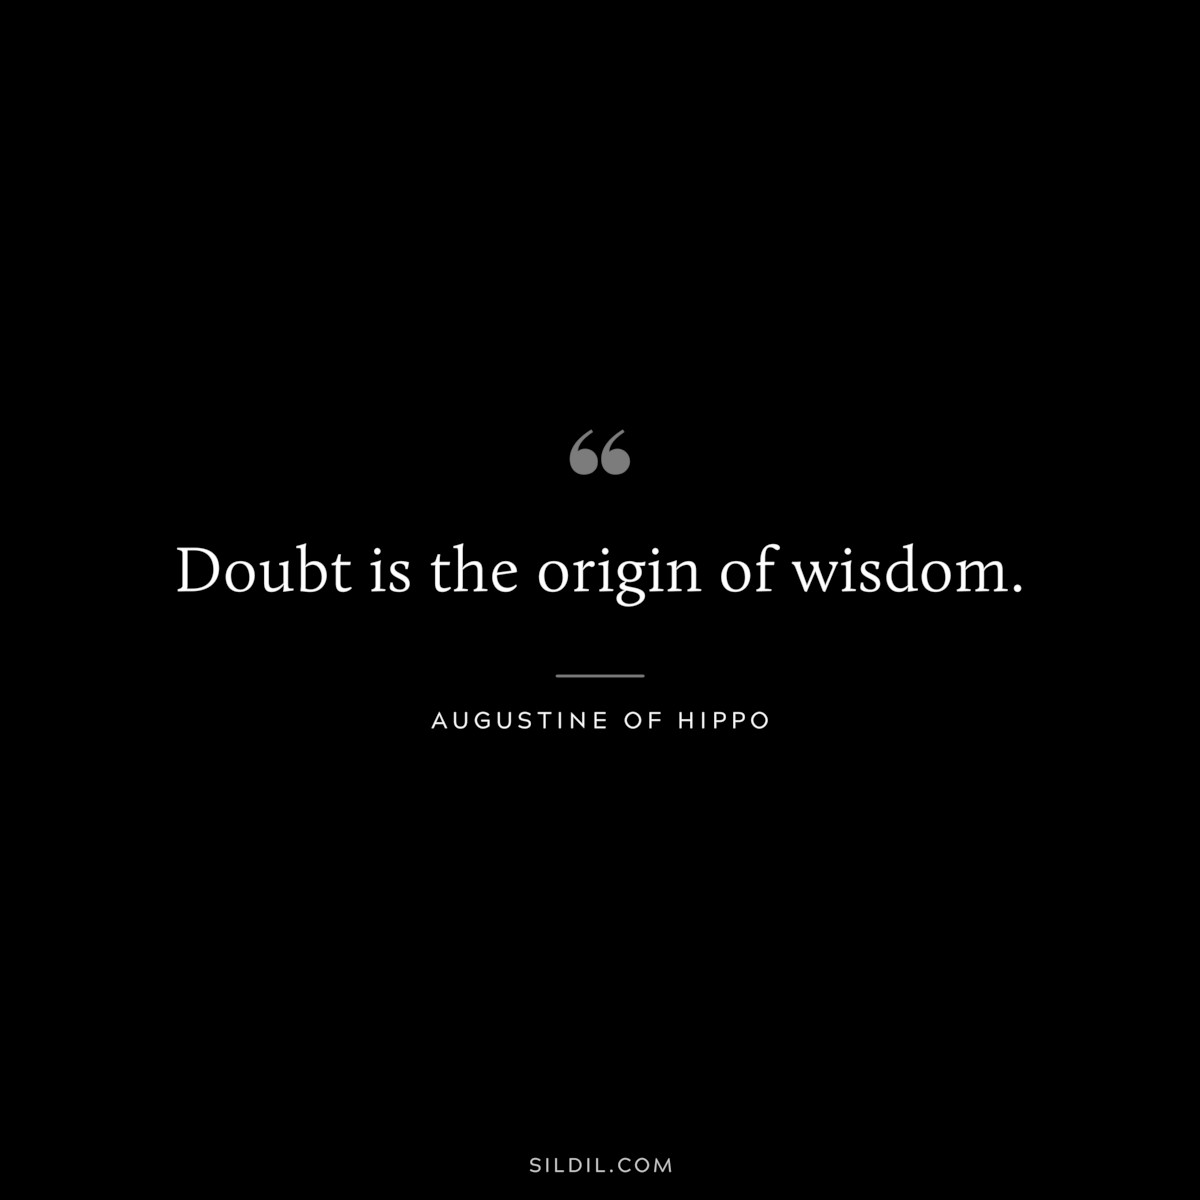 Doubt is the origin of wisdom. ― Augustine of Hippo